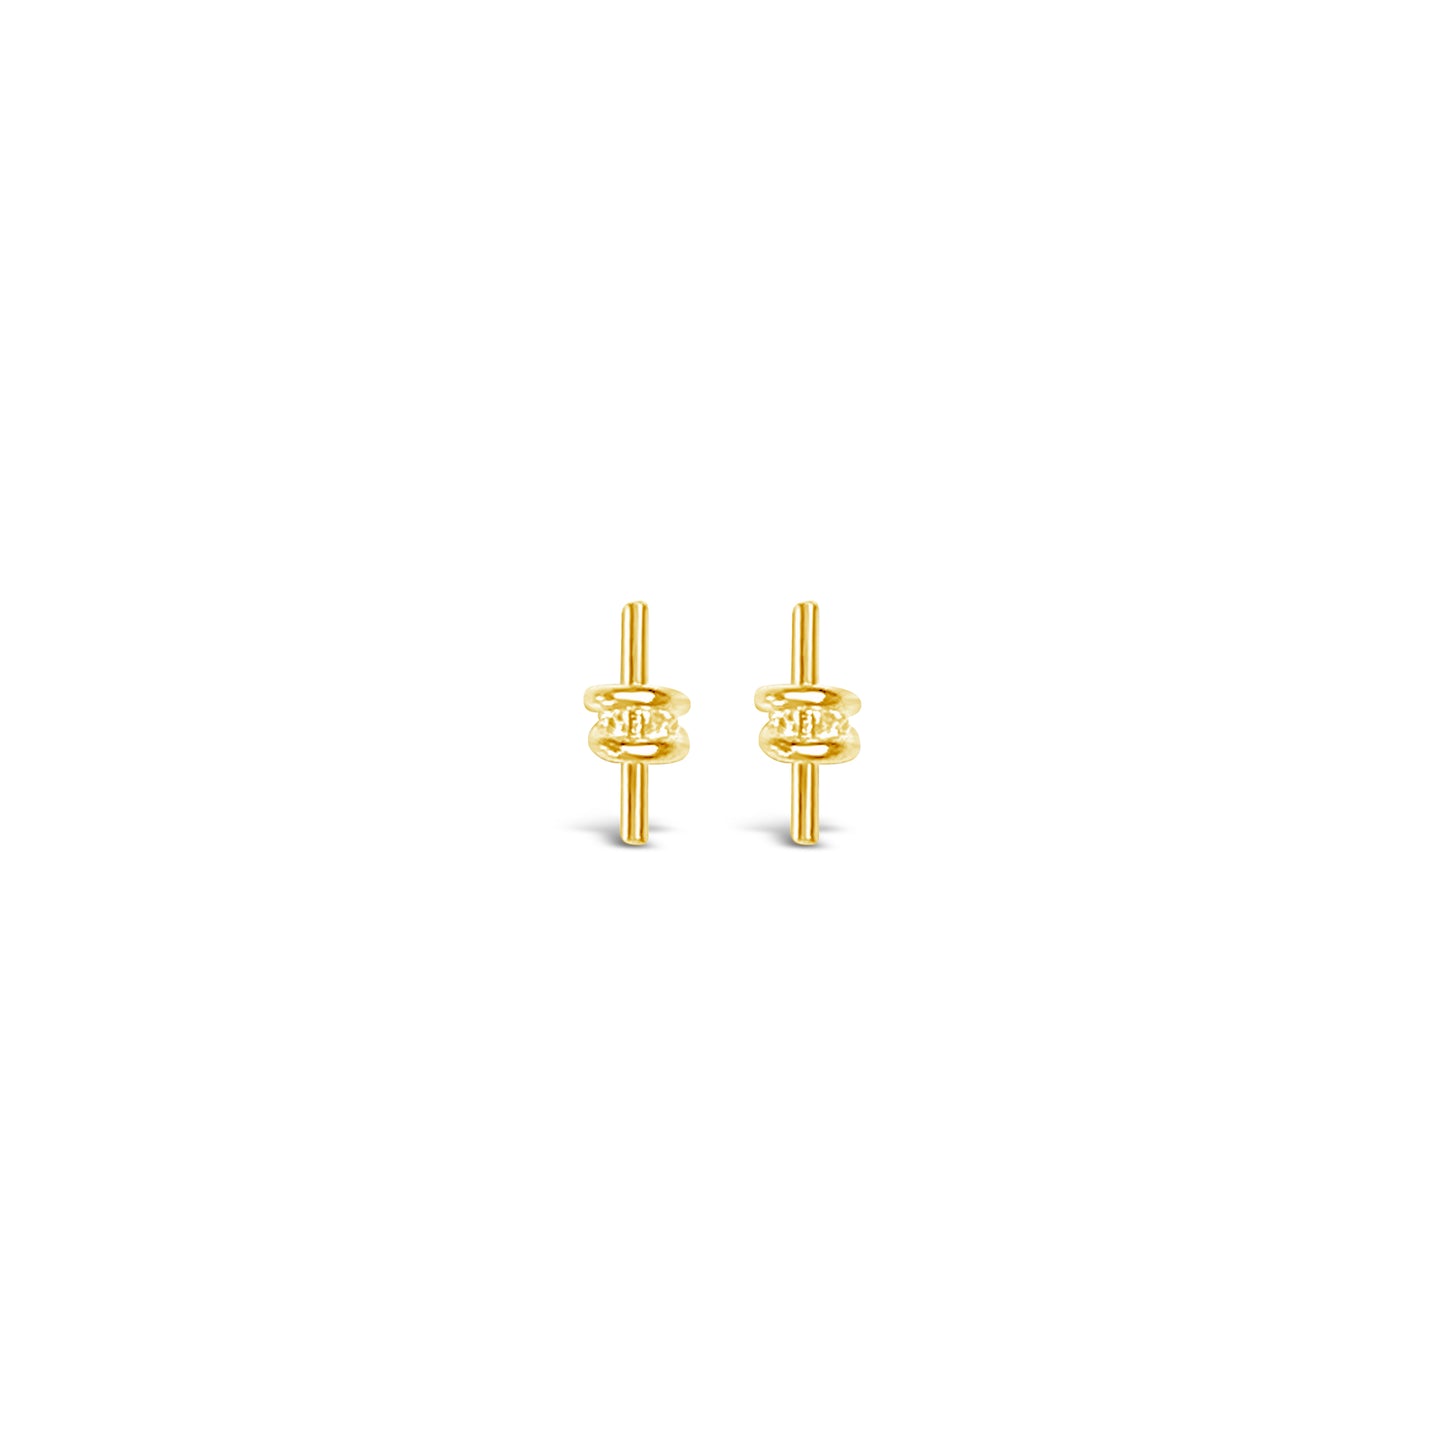 Knotted Bar Earrings, Gold